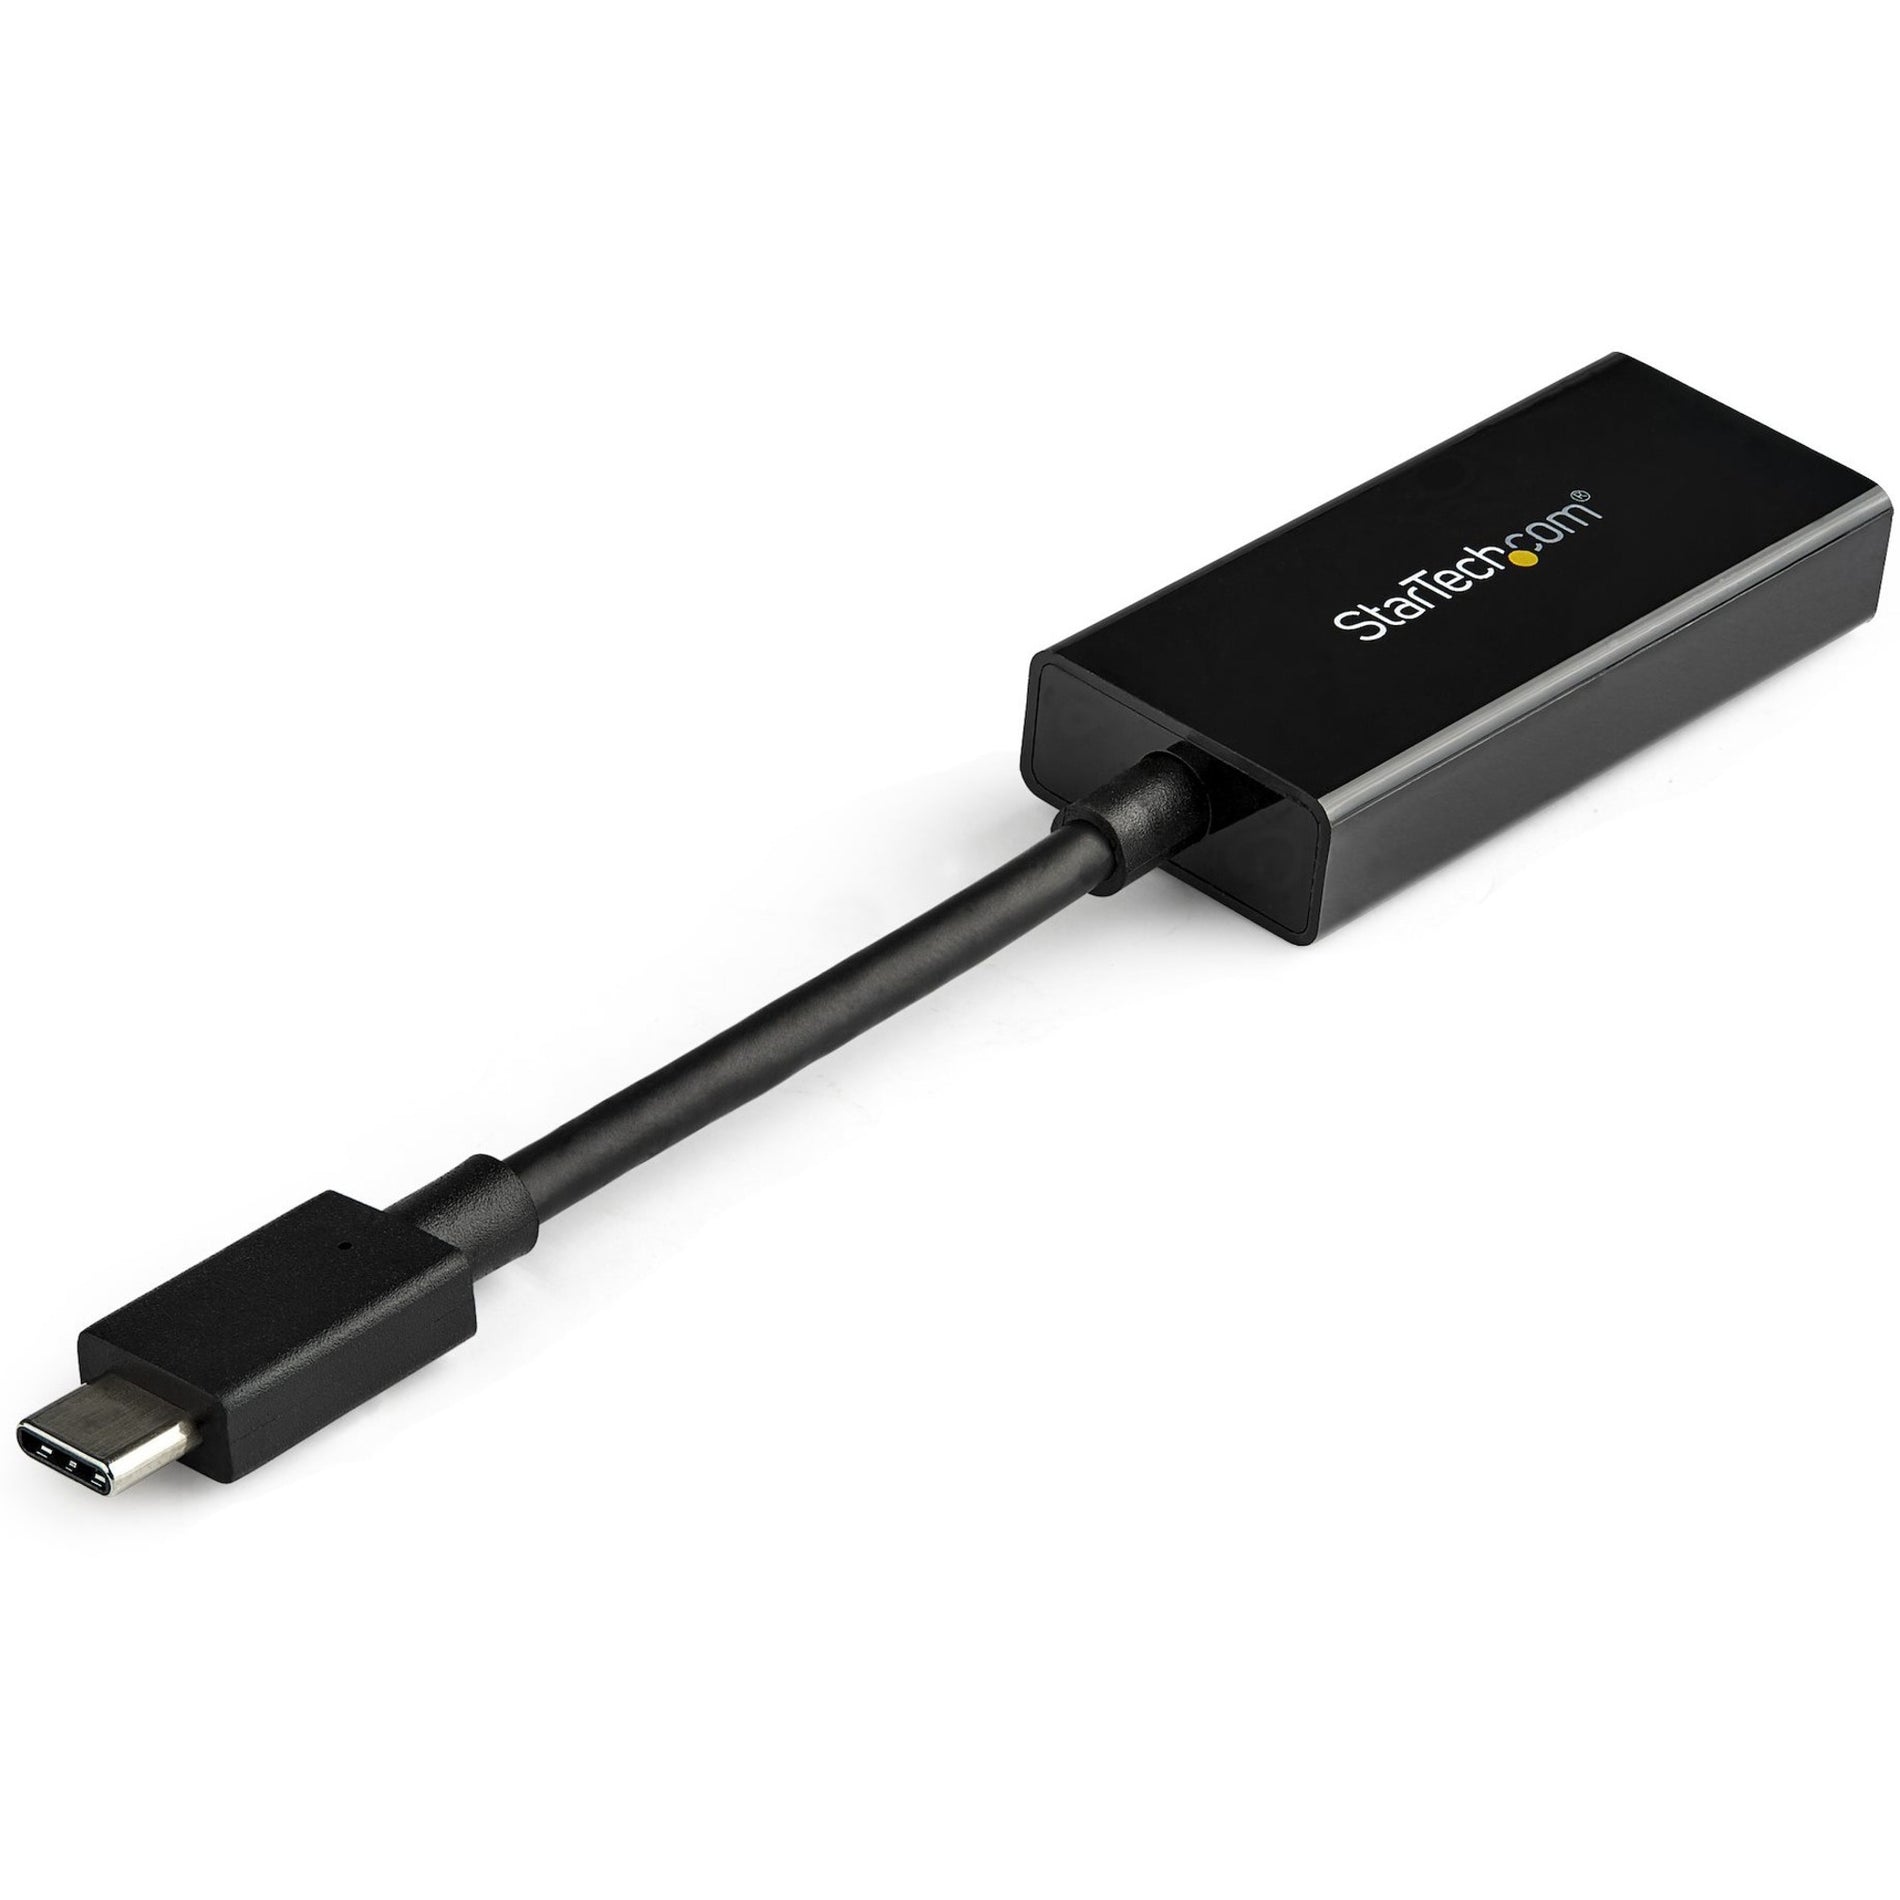 StarTech.com CDP2HD4K60H USB-C To HDMI Adapter with HDR - 4K 60Hz, Black